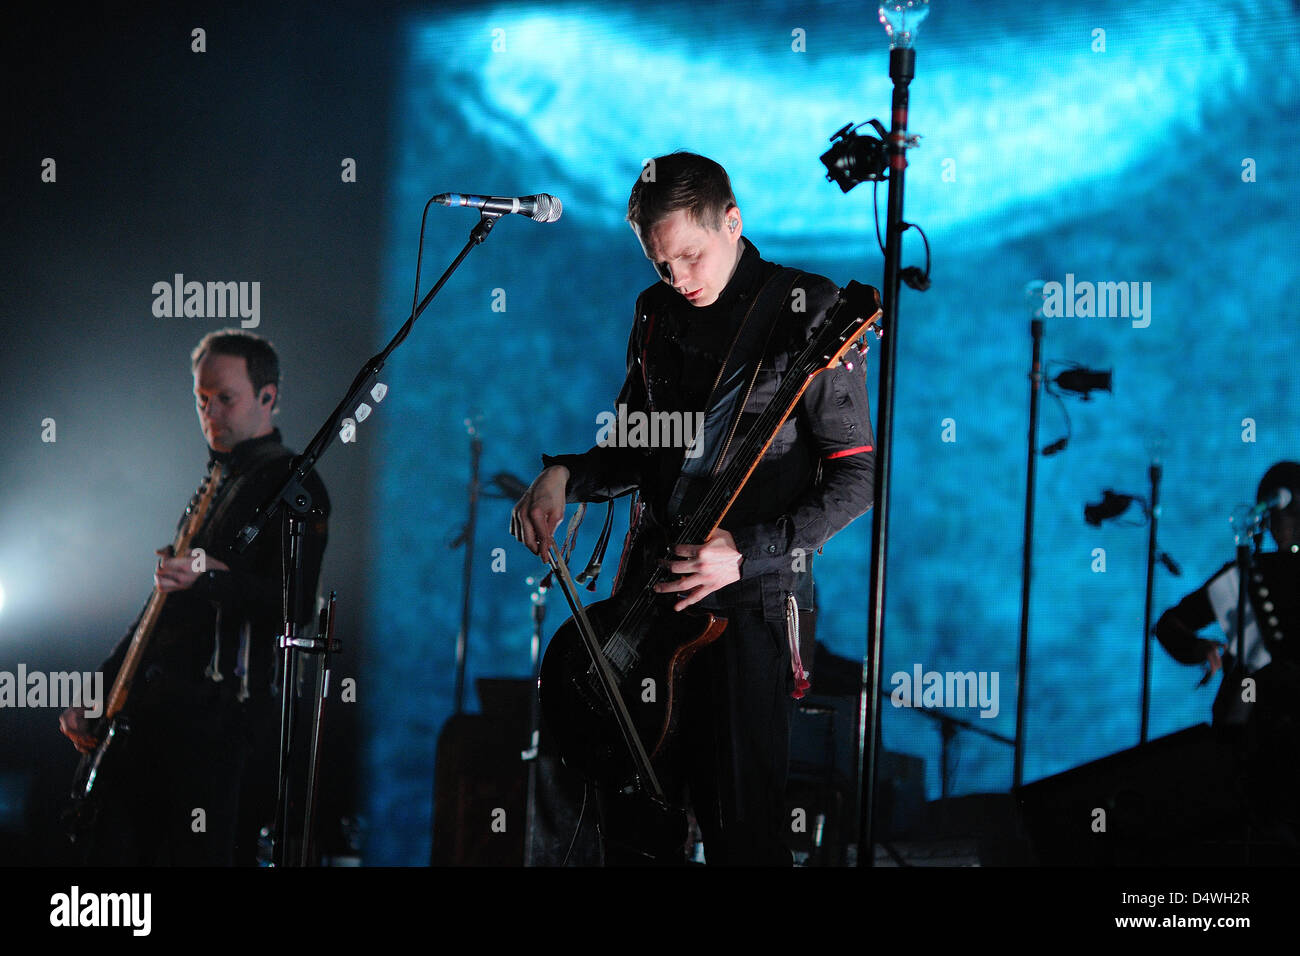 BARCELONA - FEB 16: Sigur Ros band performs at St. Jordi Club on February 16, 2013 in Barcelona, Spain. Stock Photo